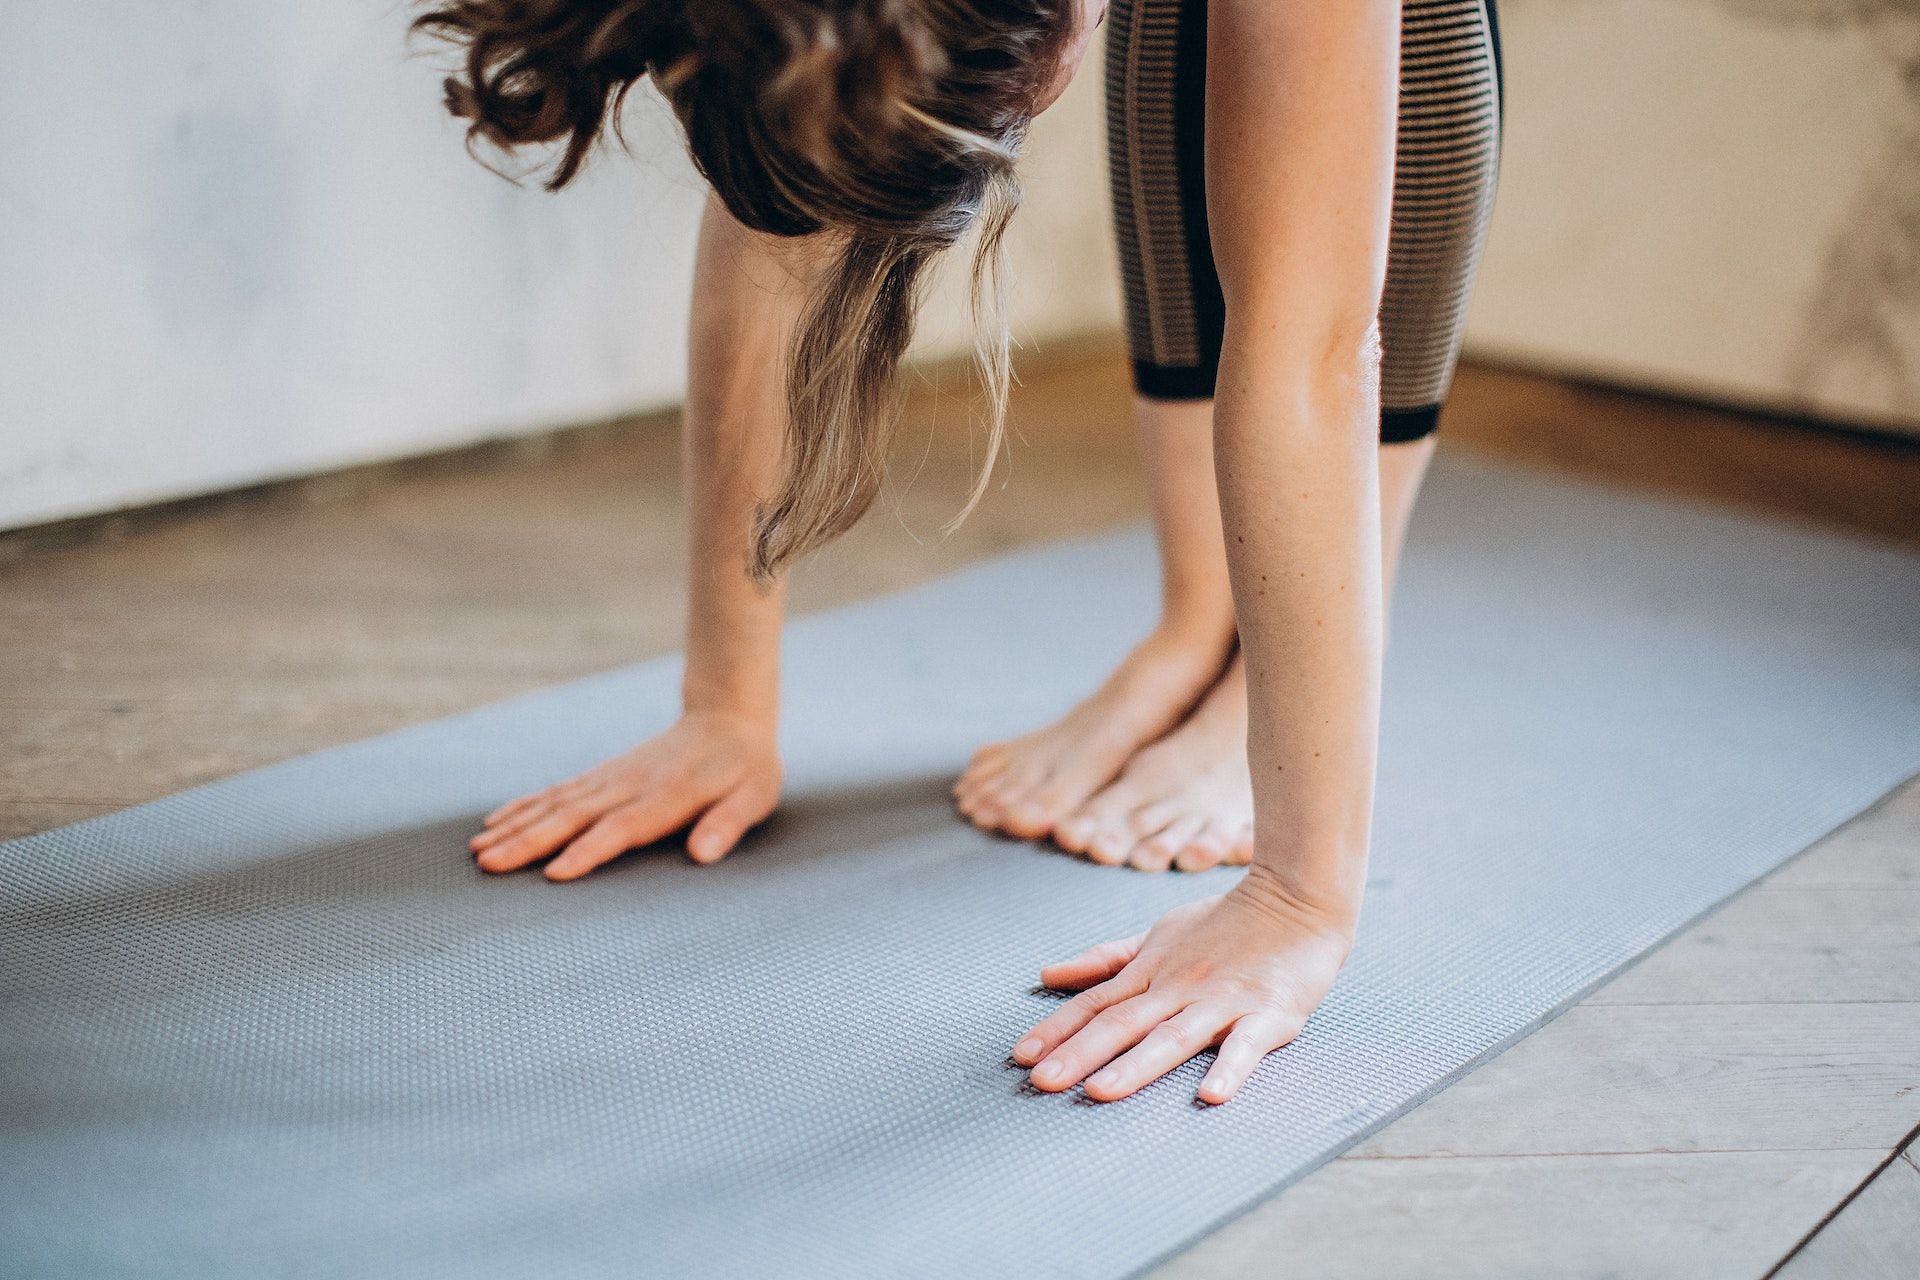 Yoga poses help stretch and strengthen the quads. (Photo via Pexels/Elina Fairytale)